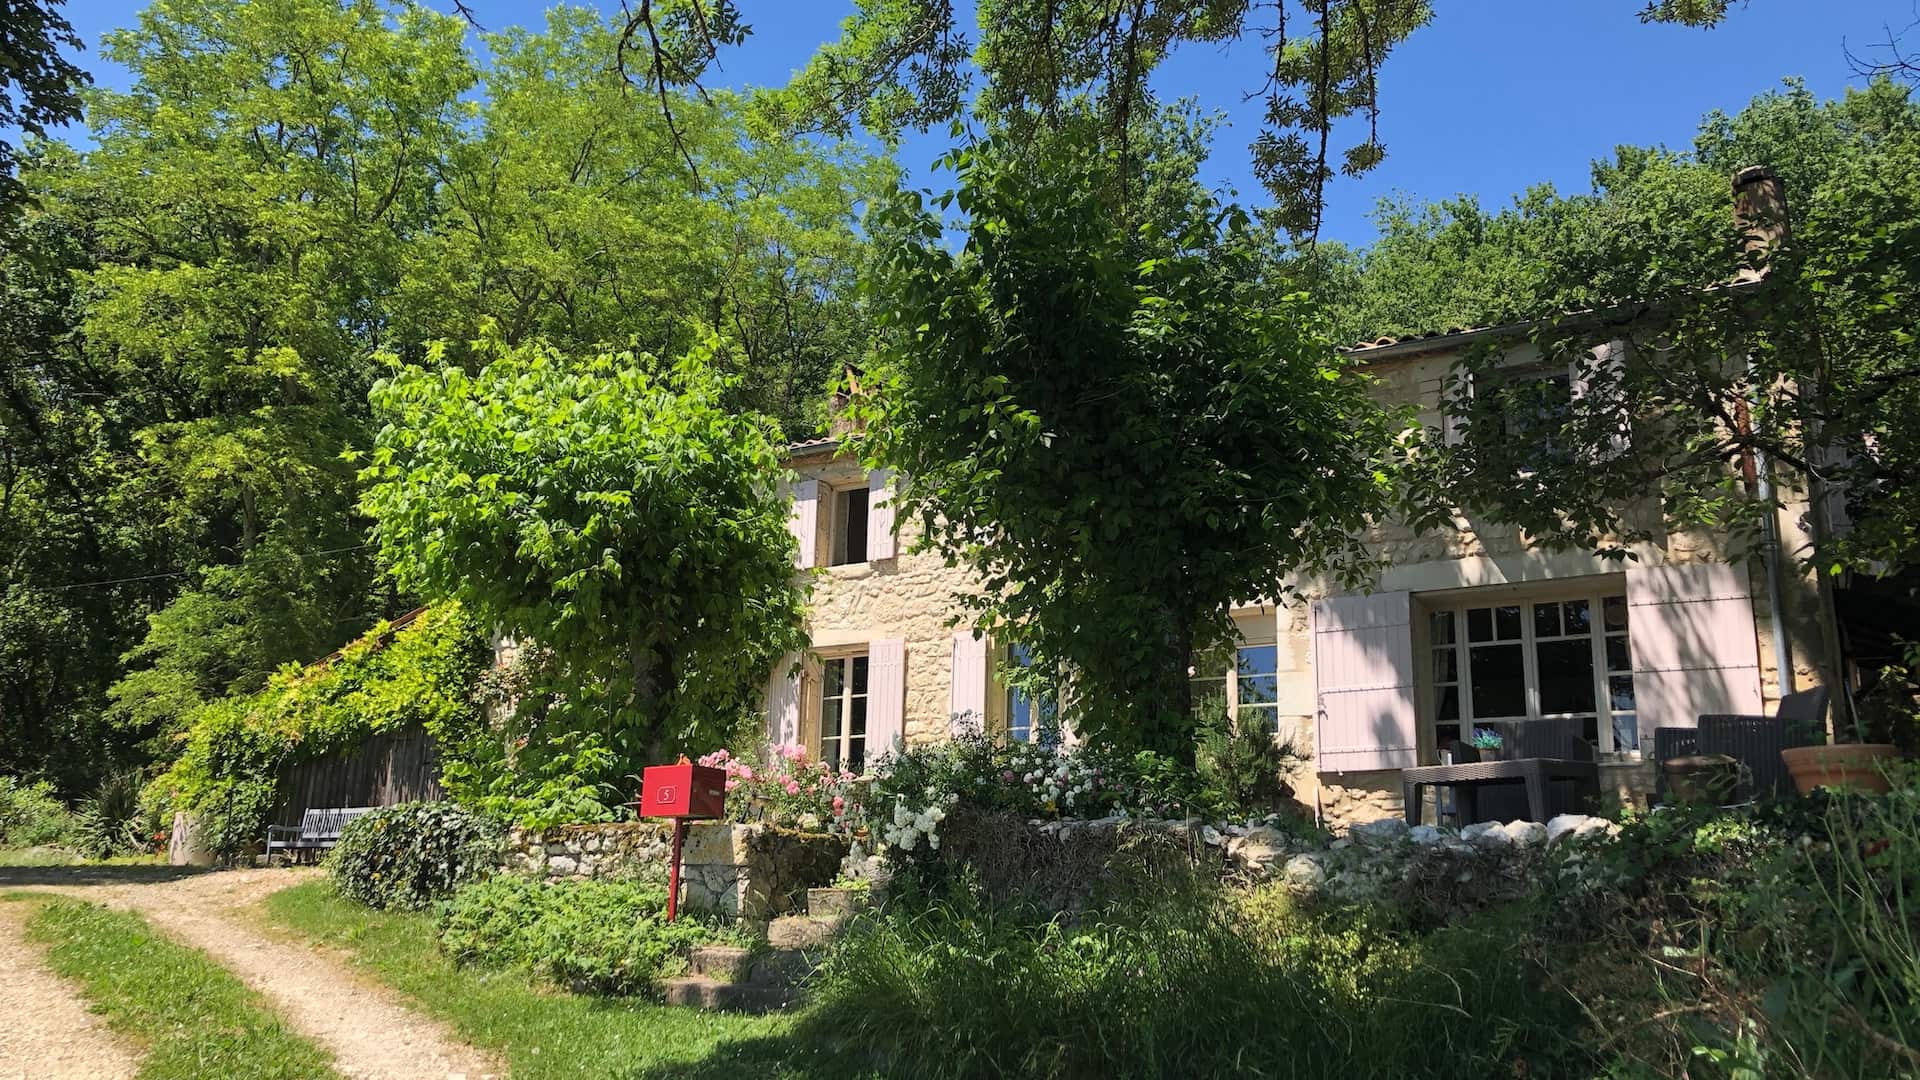 A stone farmhouse surrounded by trees and a red post box